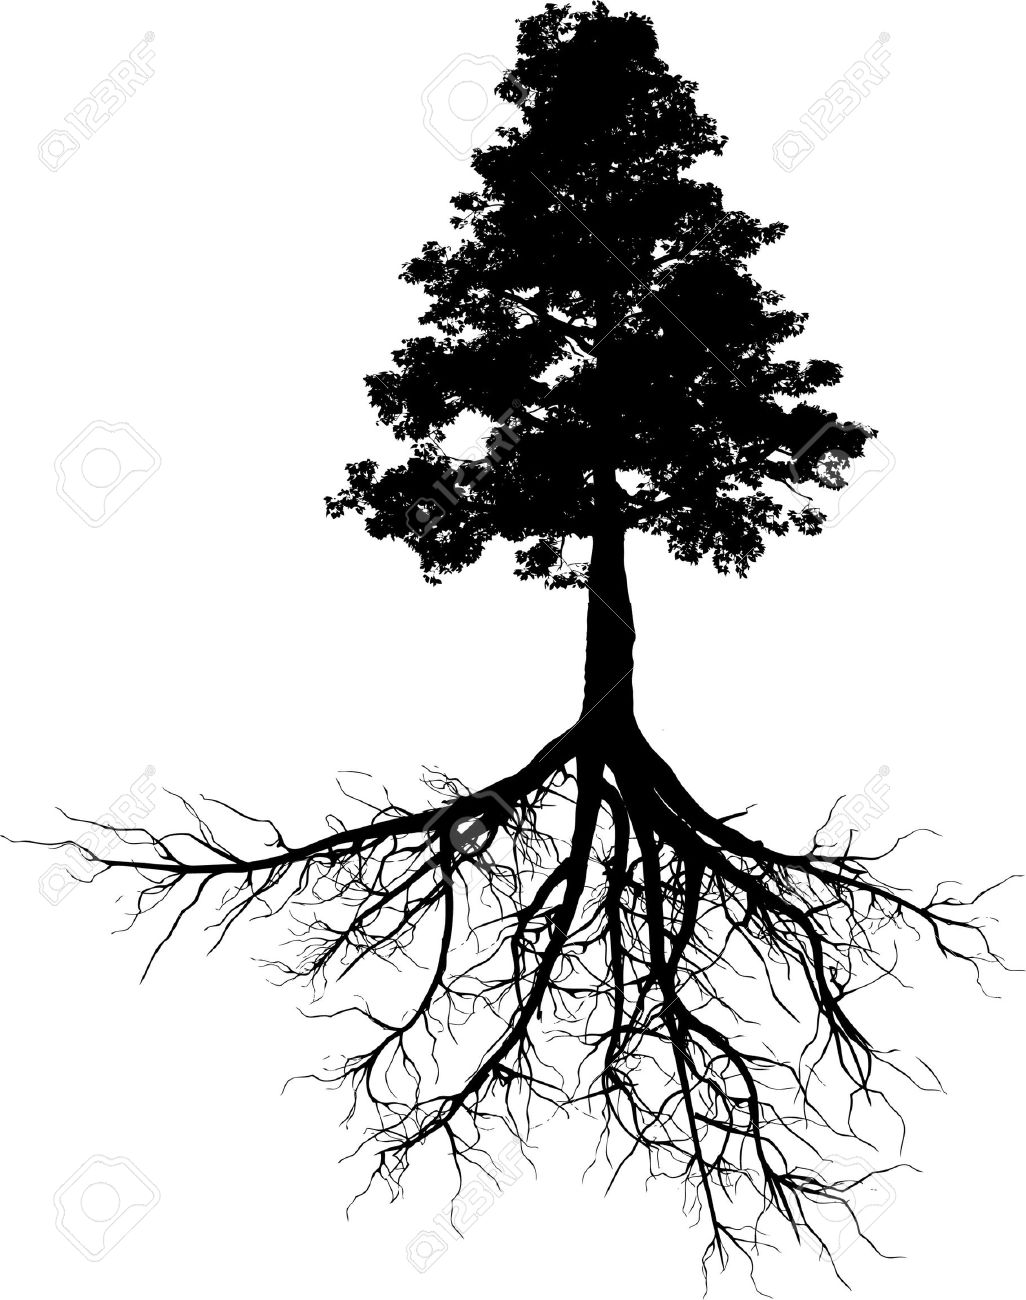 Tree Root clipart #4, Download drawings